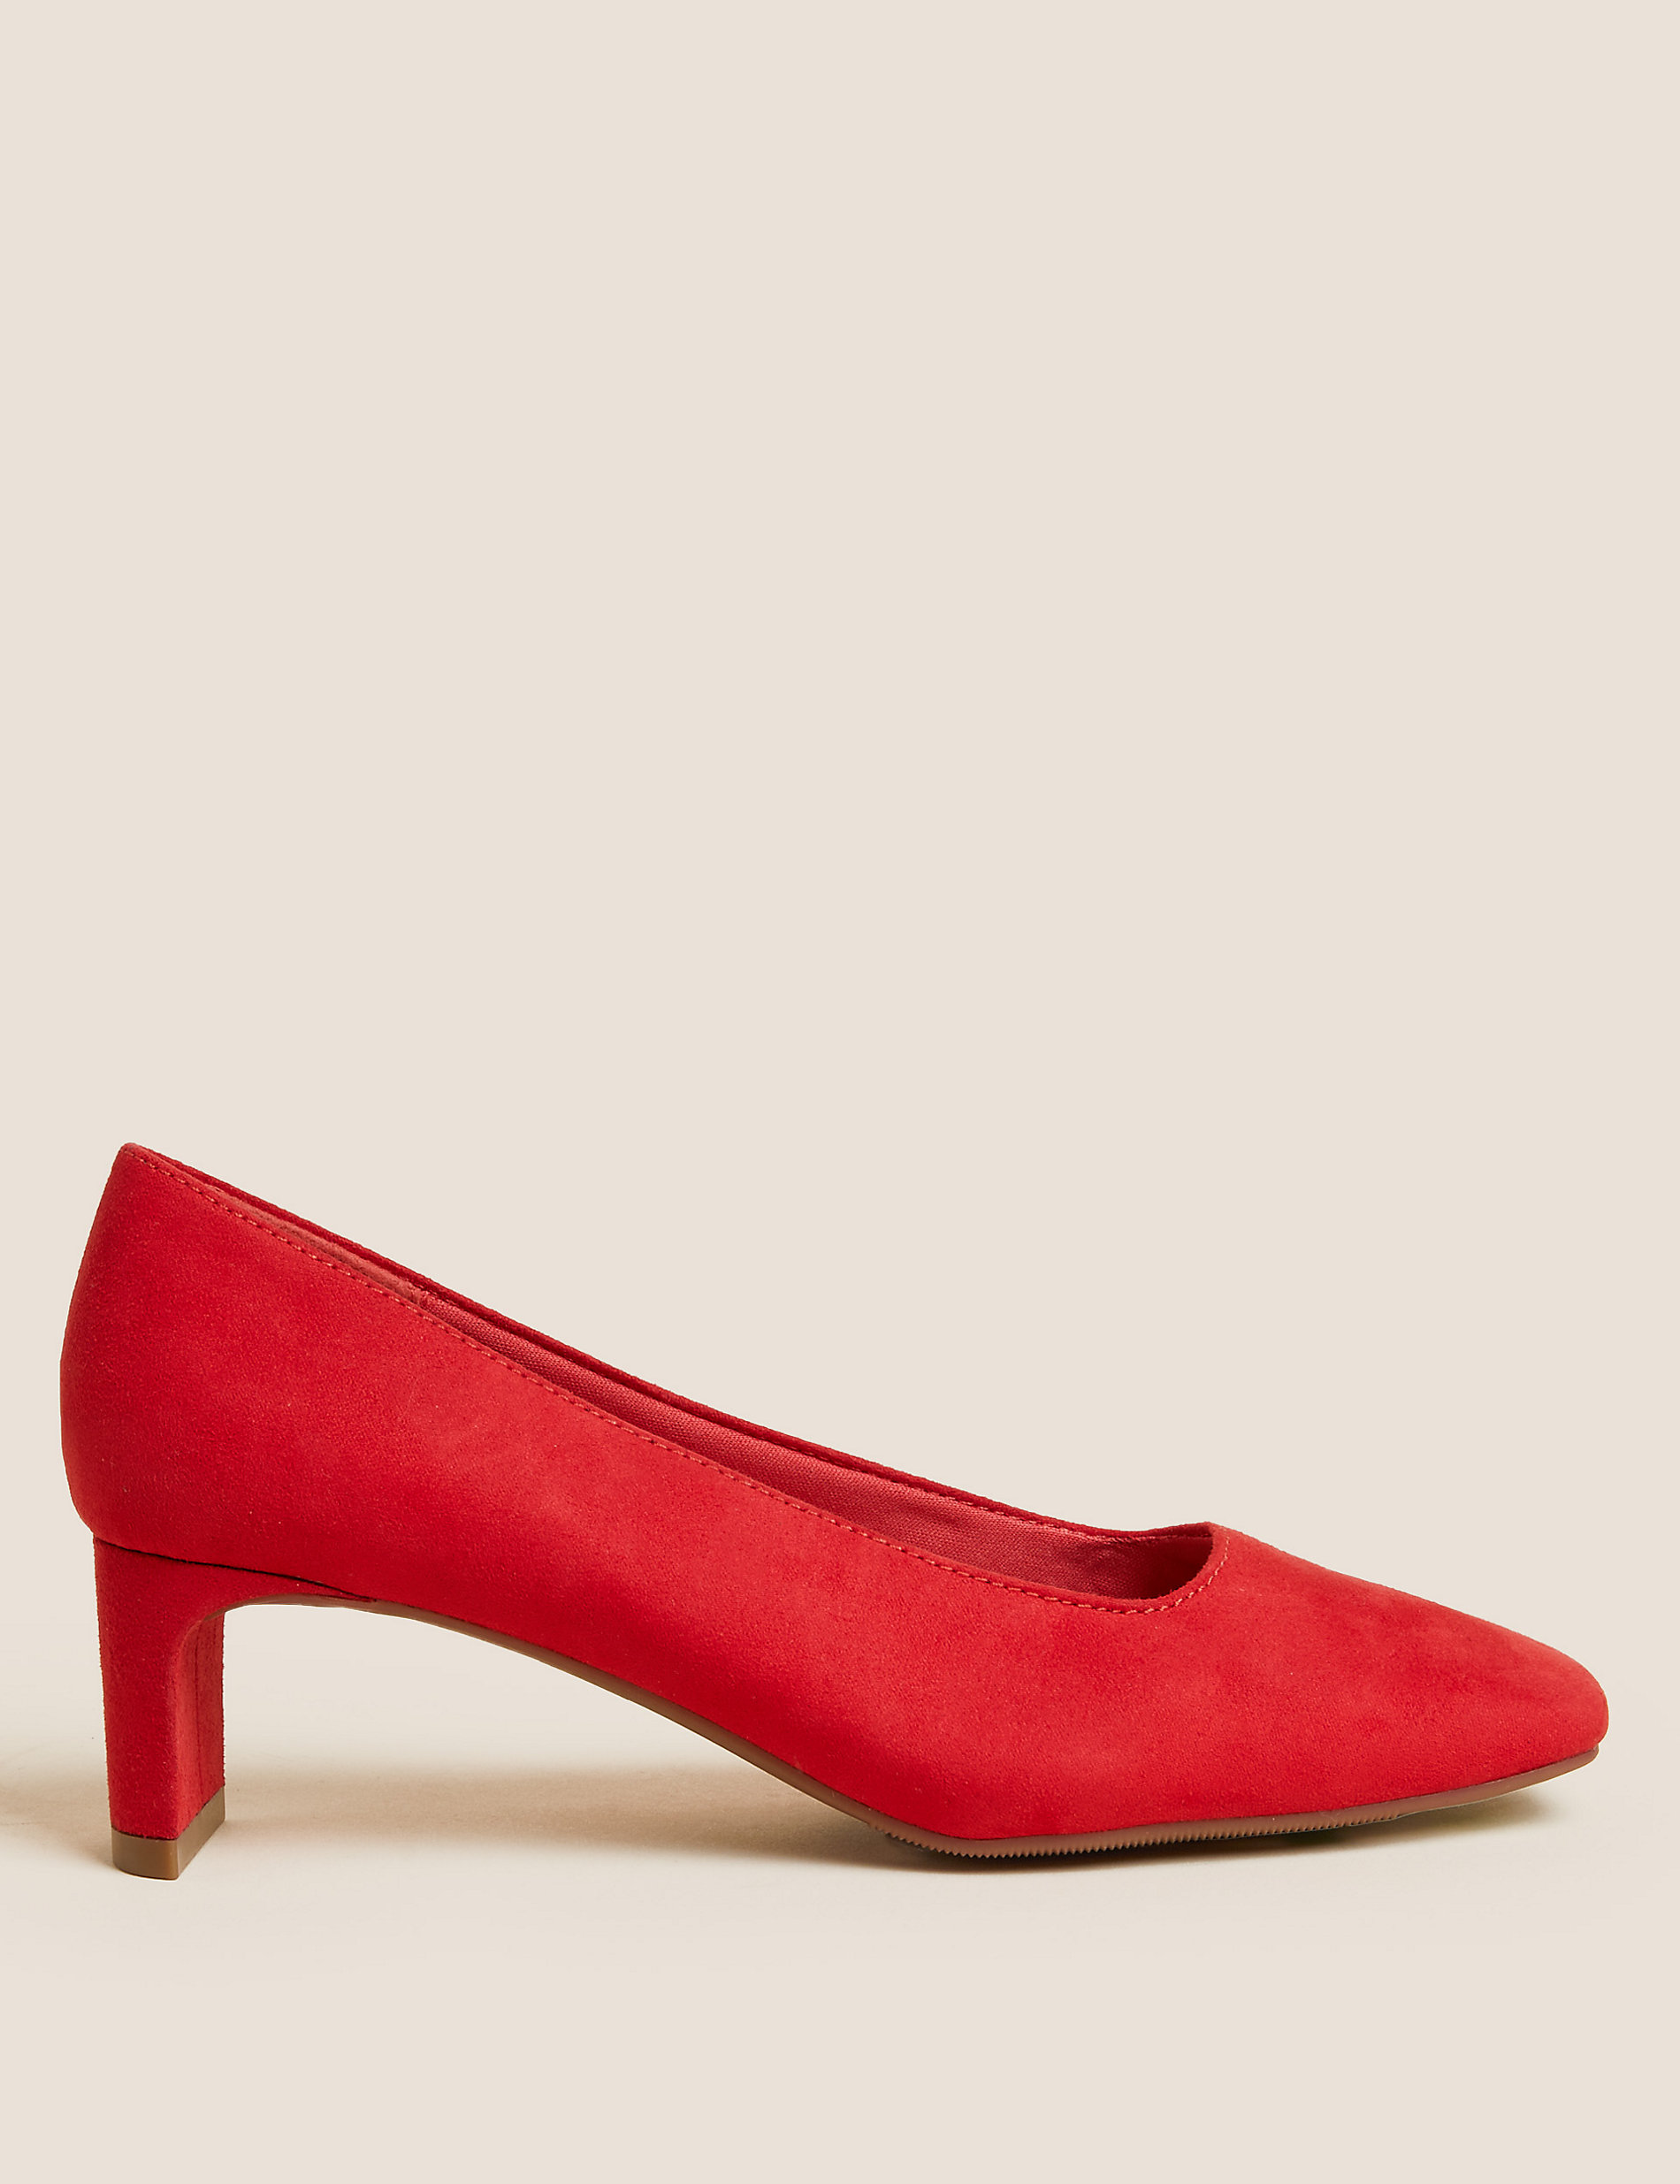 Statement Square Toe Court Shoes